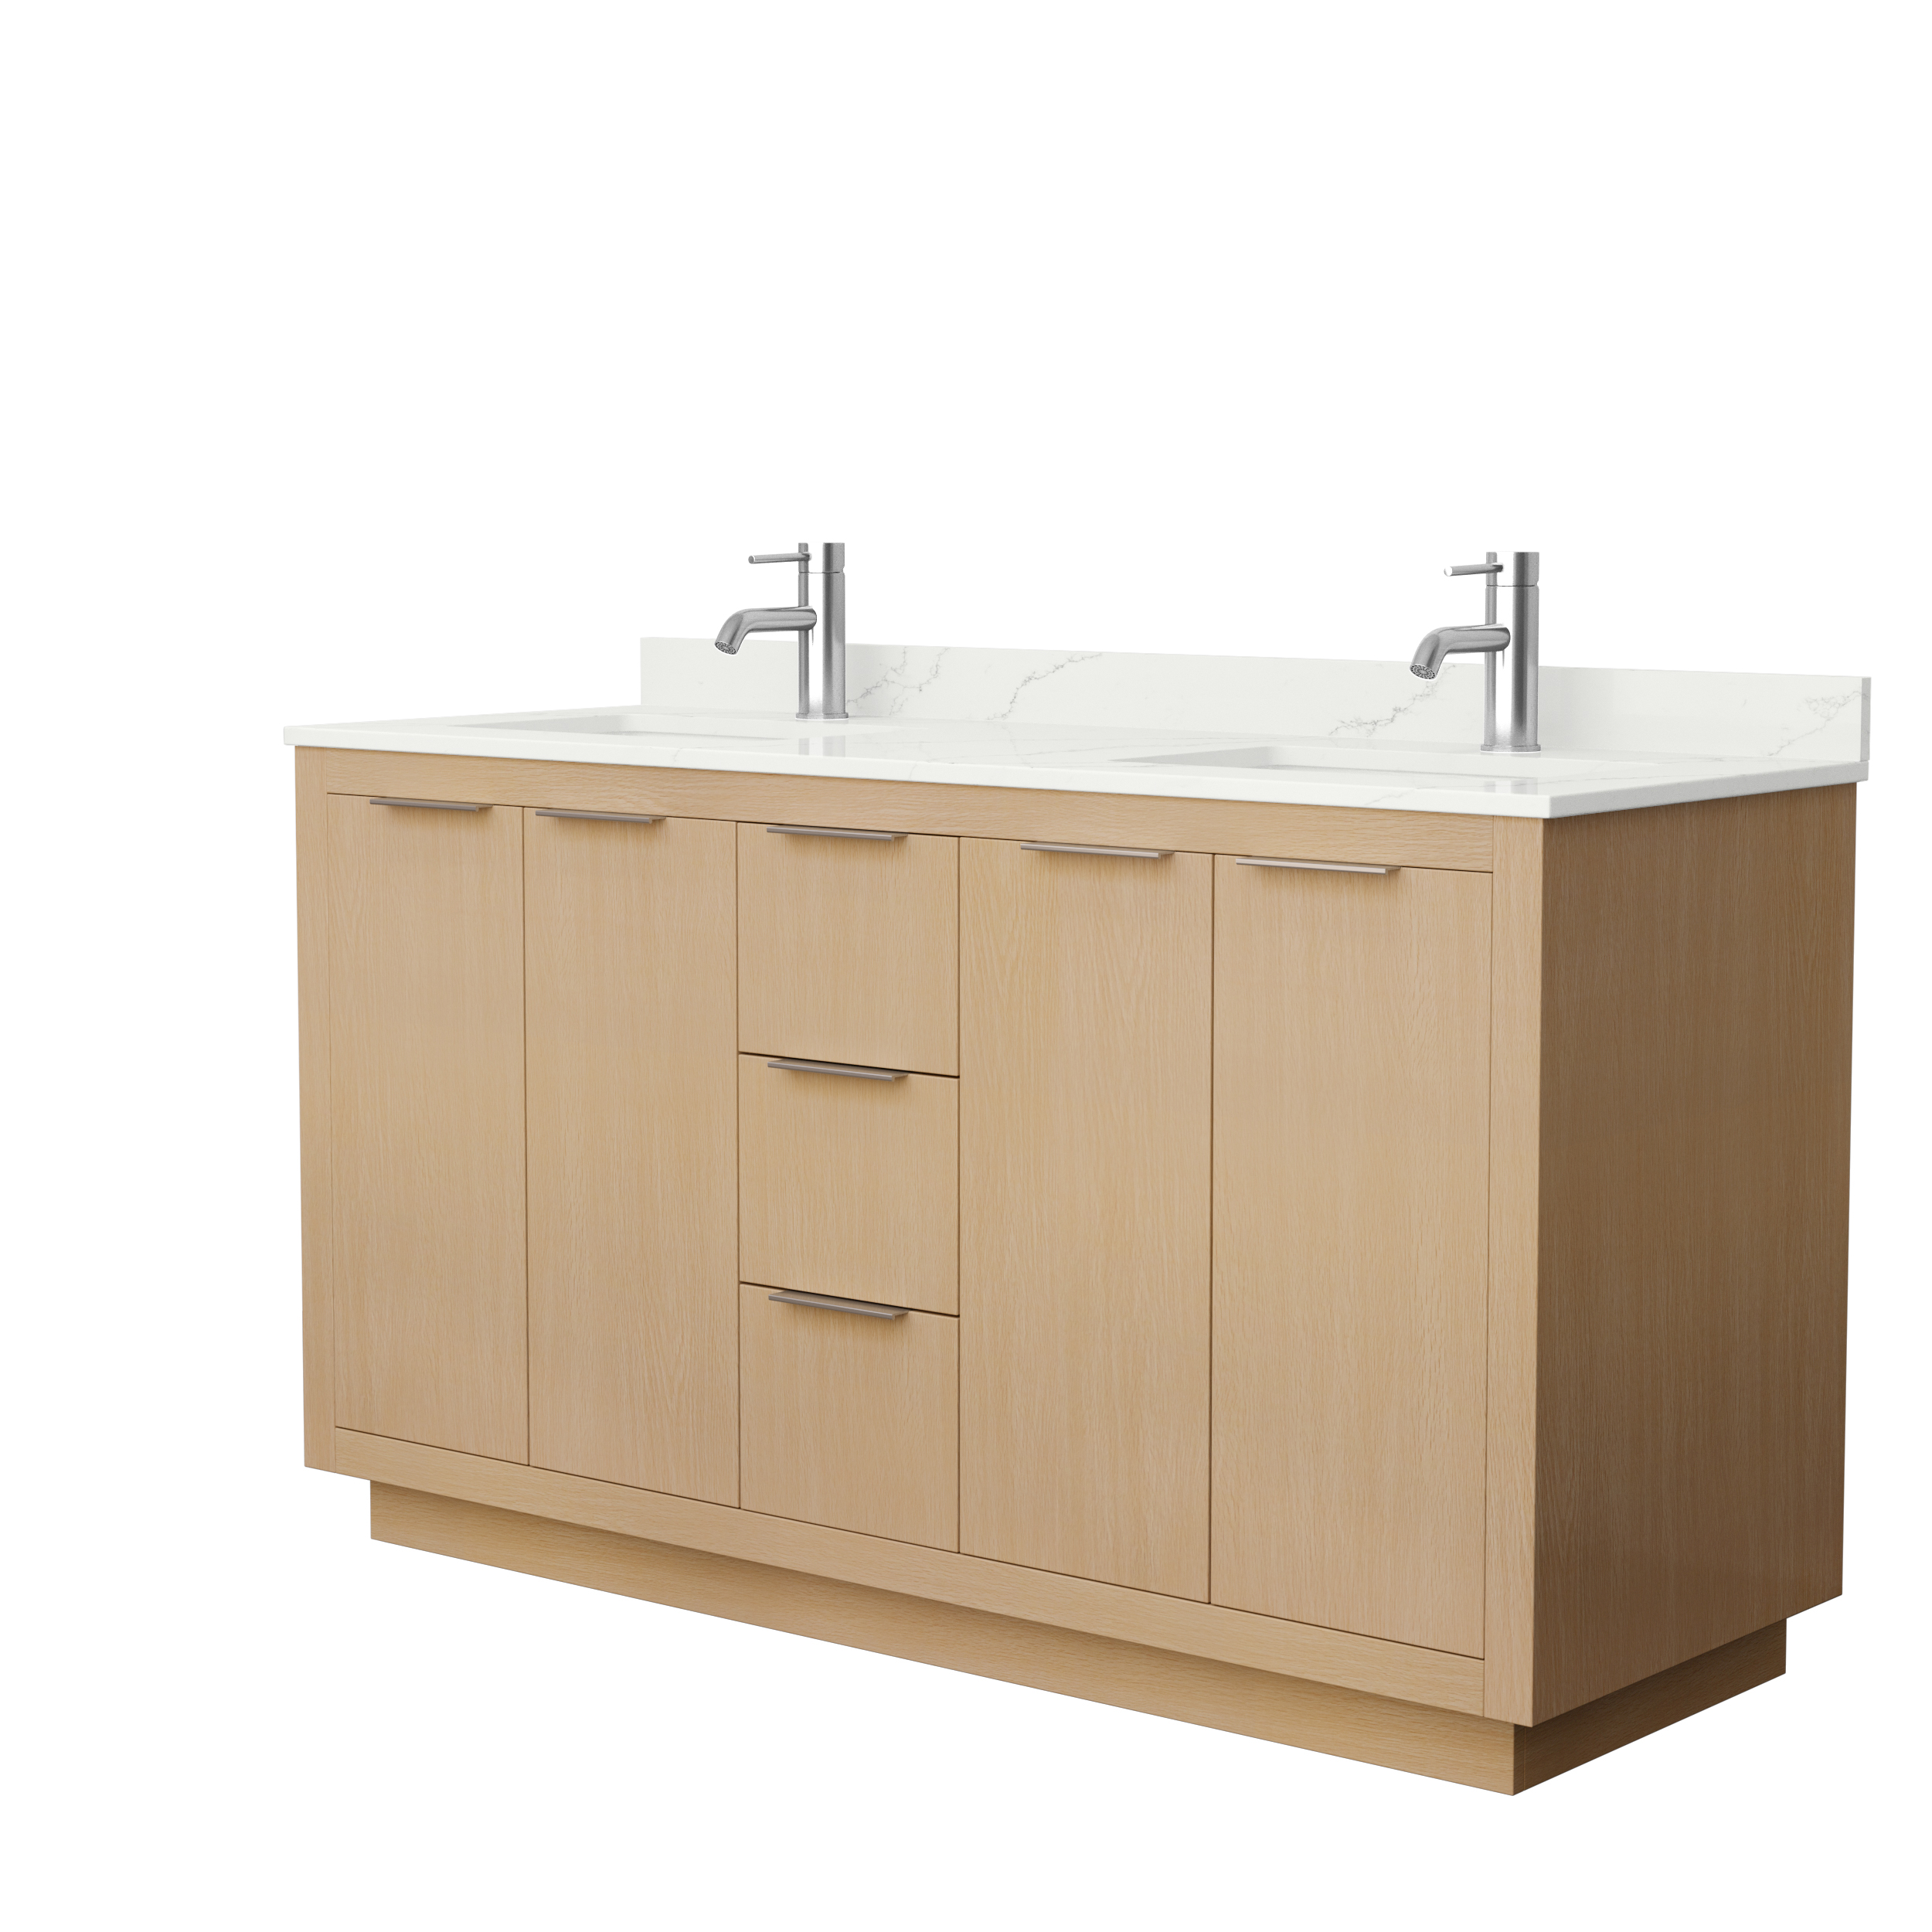 Maroni 60" Double Vanity with optional Quartz or Carrara Marble Counter - Light Straw WC-2828-60-DBL-VAN-LST--